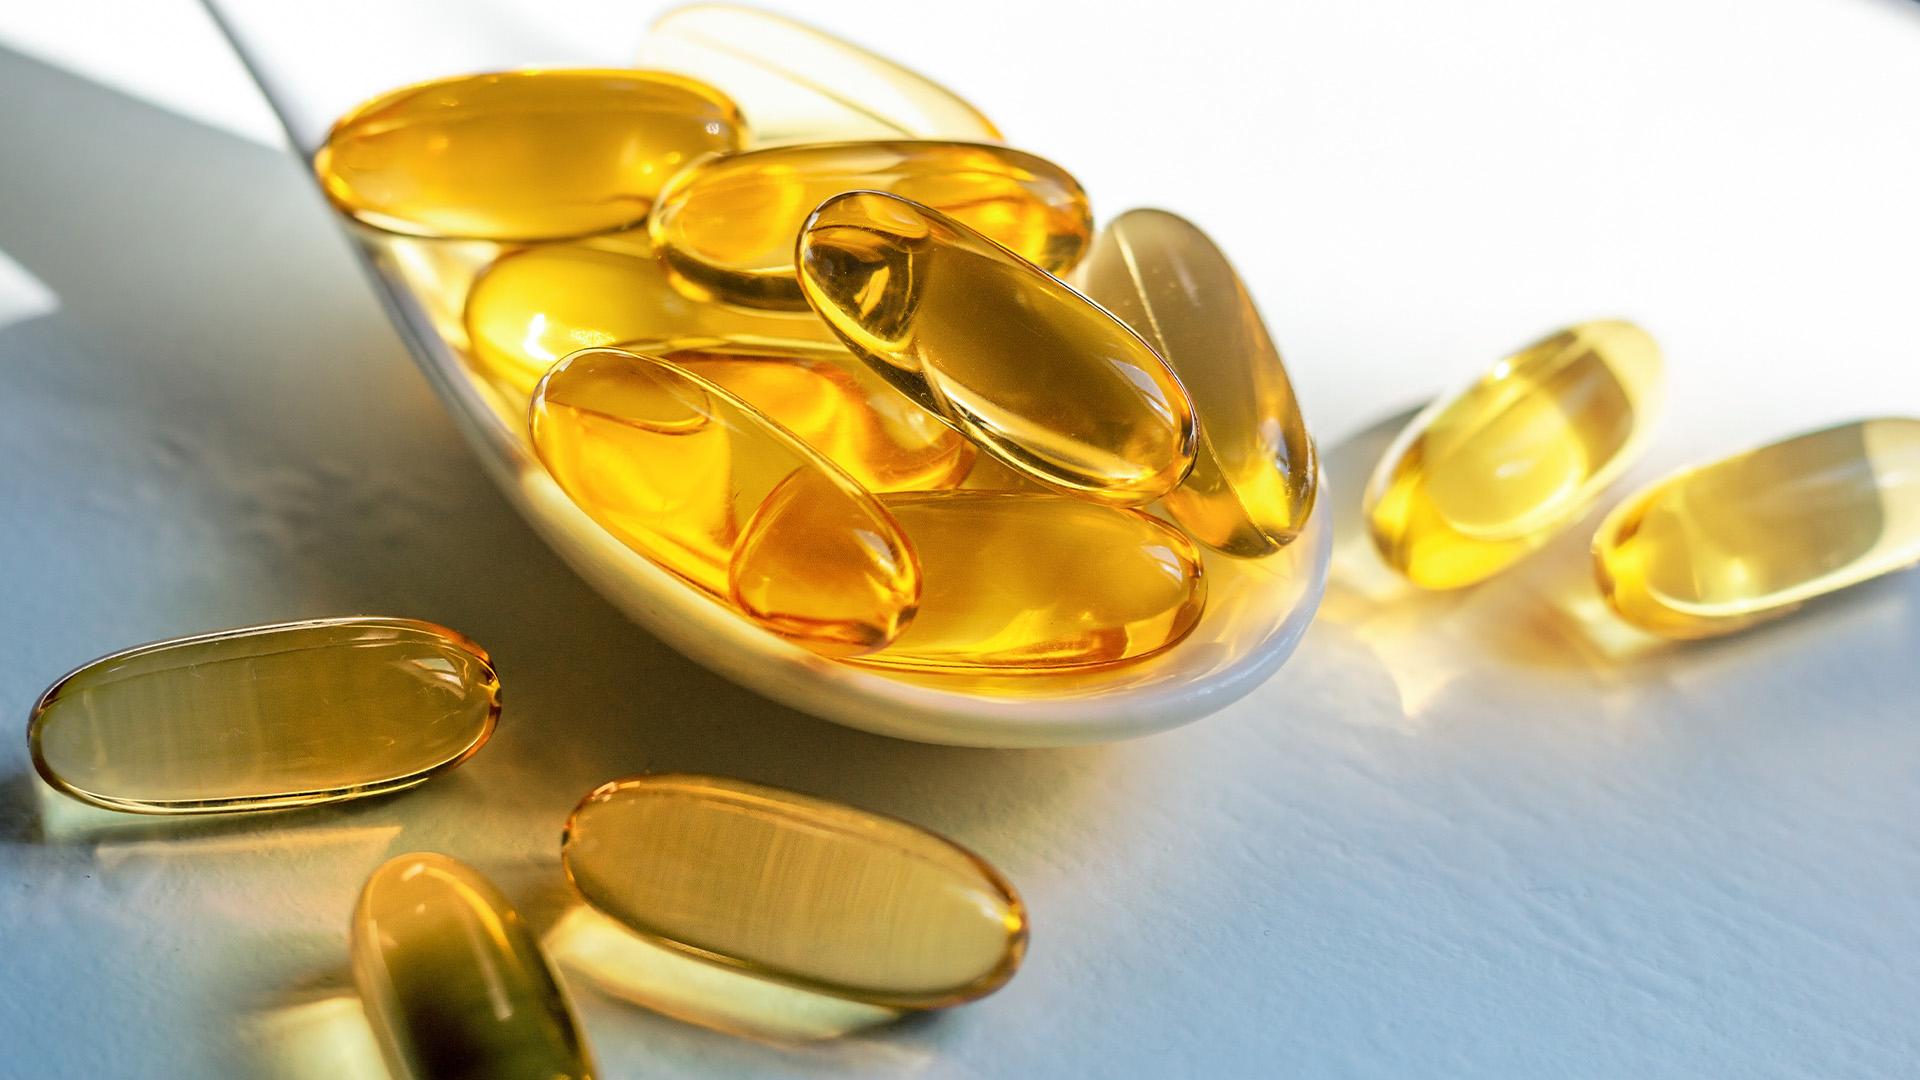 How much vitamin D is safe for kidney stone-formers?